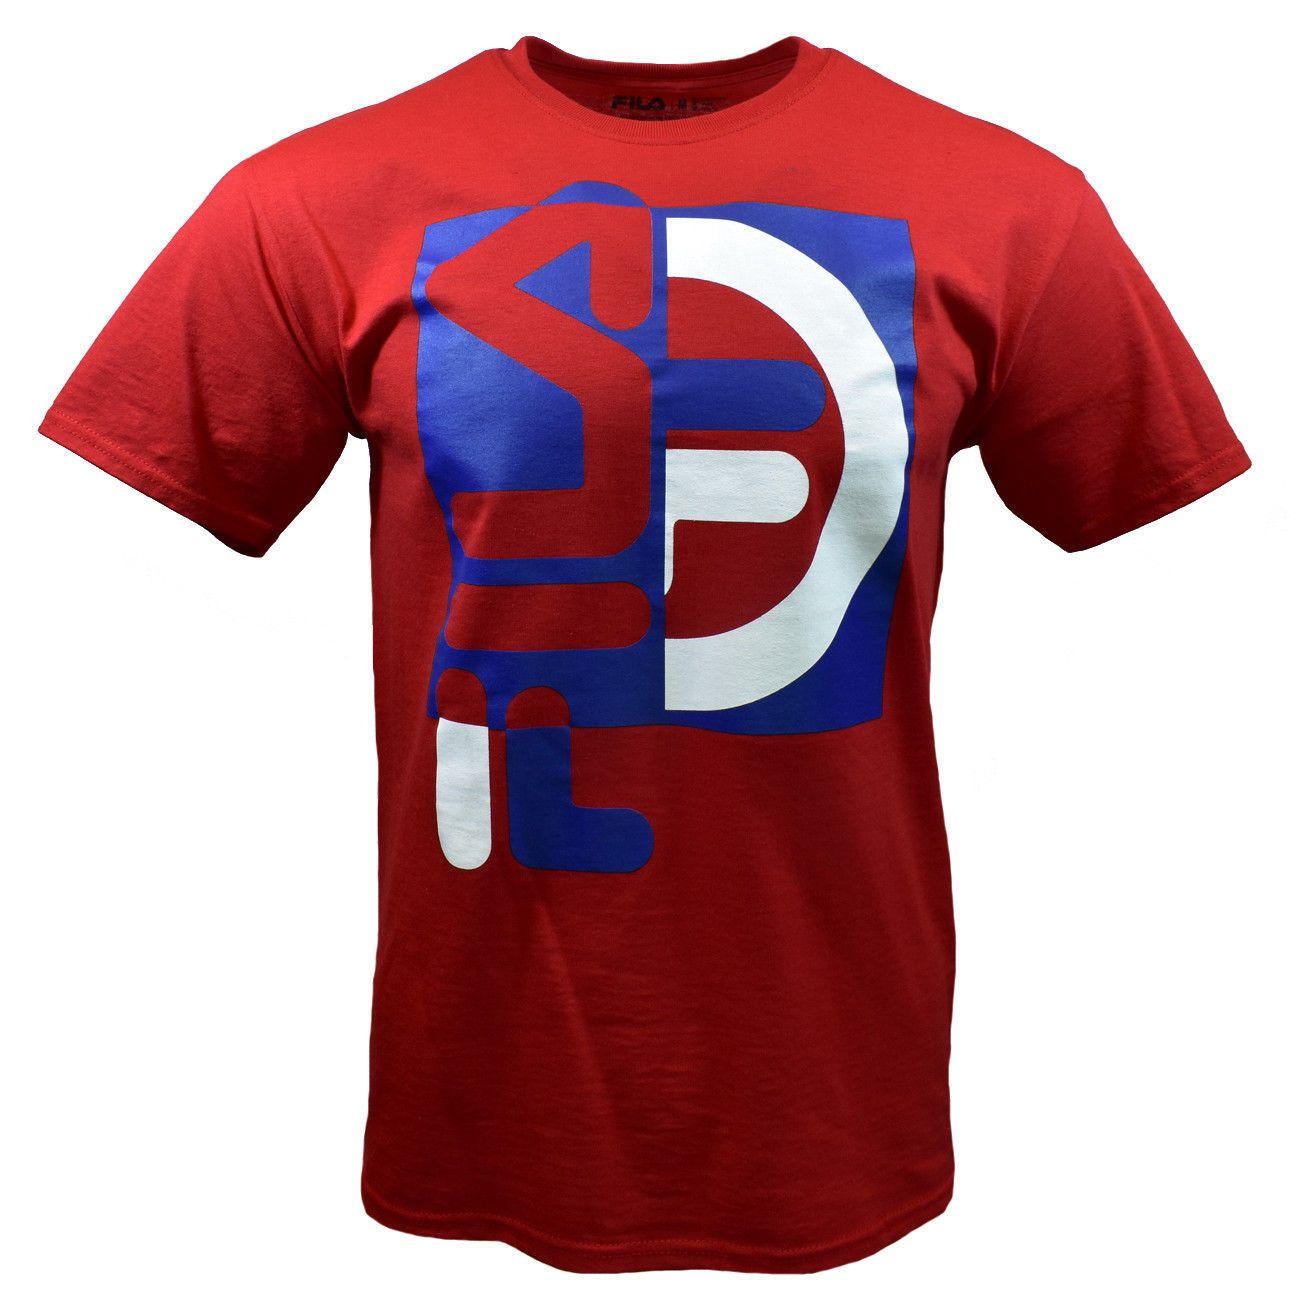 Red White and Blue Clothing and Apparel Logo - 的 FILA Mens Tee T Shirt S M L Red White Blue Sports Logo